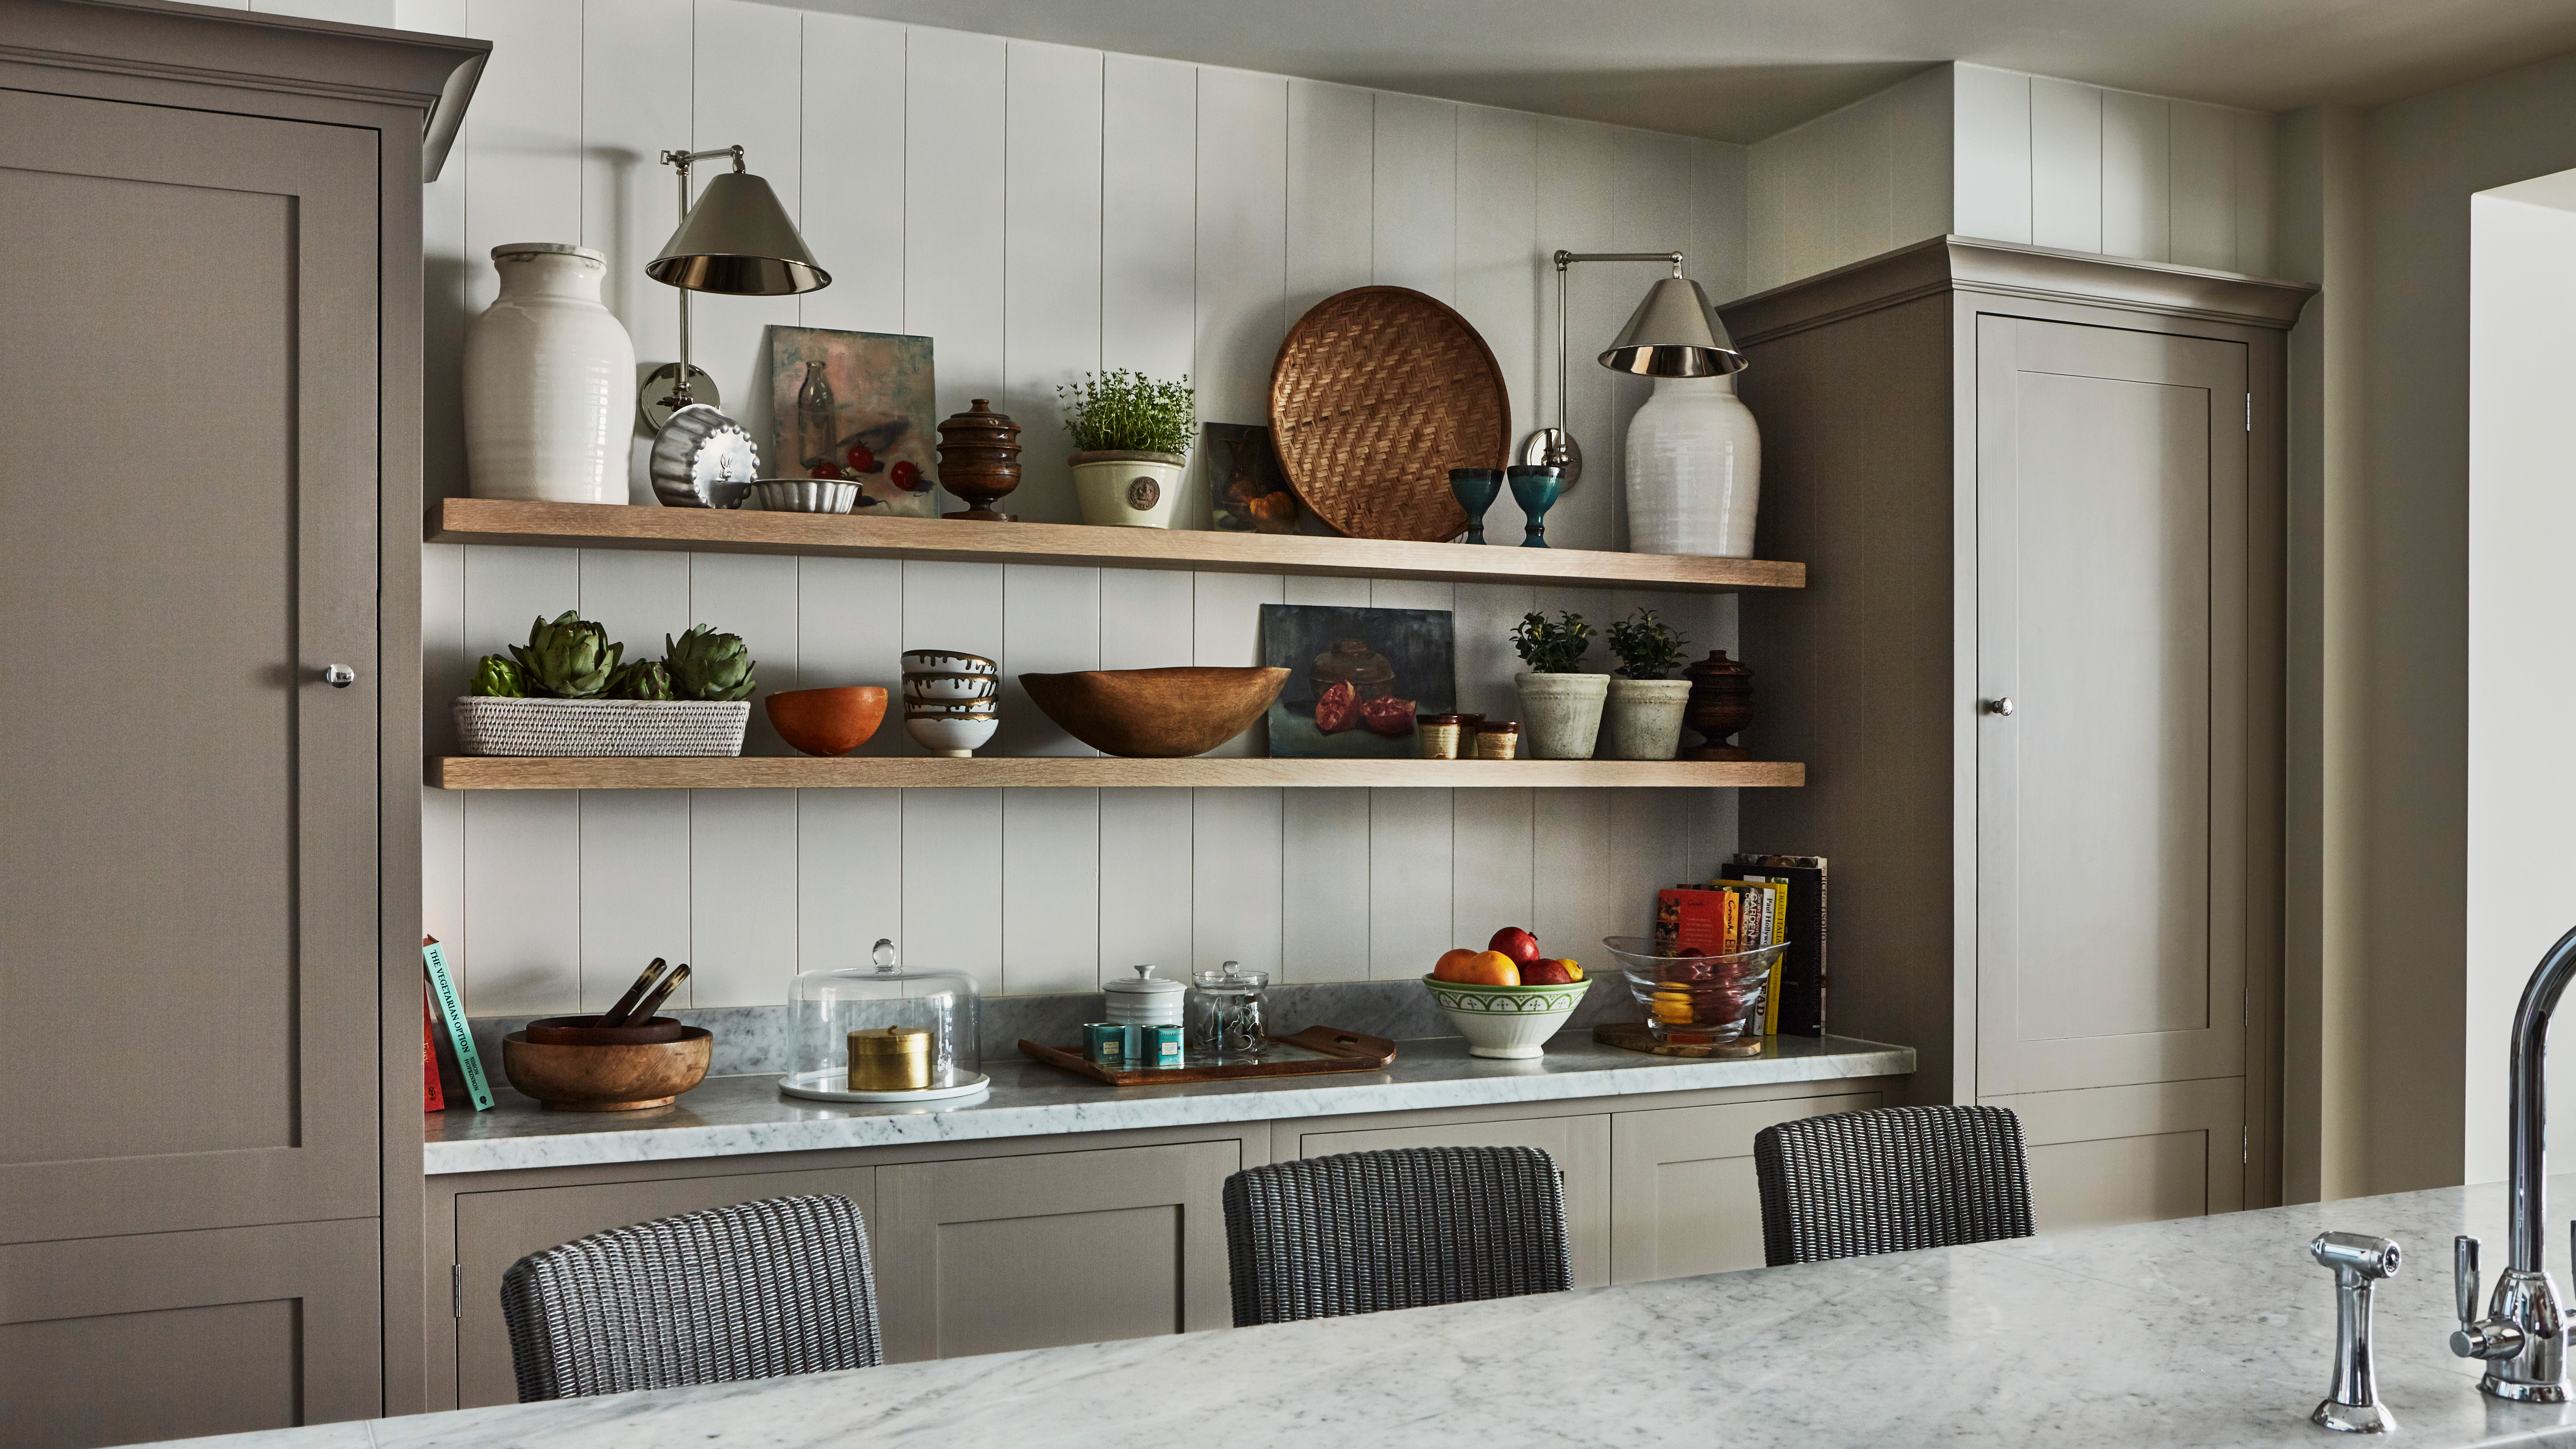 Kitchen shelving ideas 18 ways to boost storage and display space ...